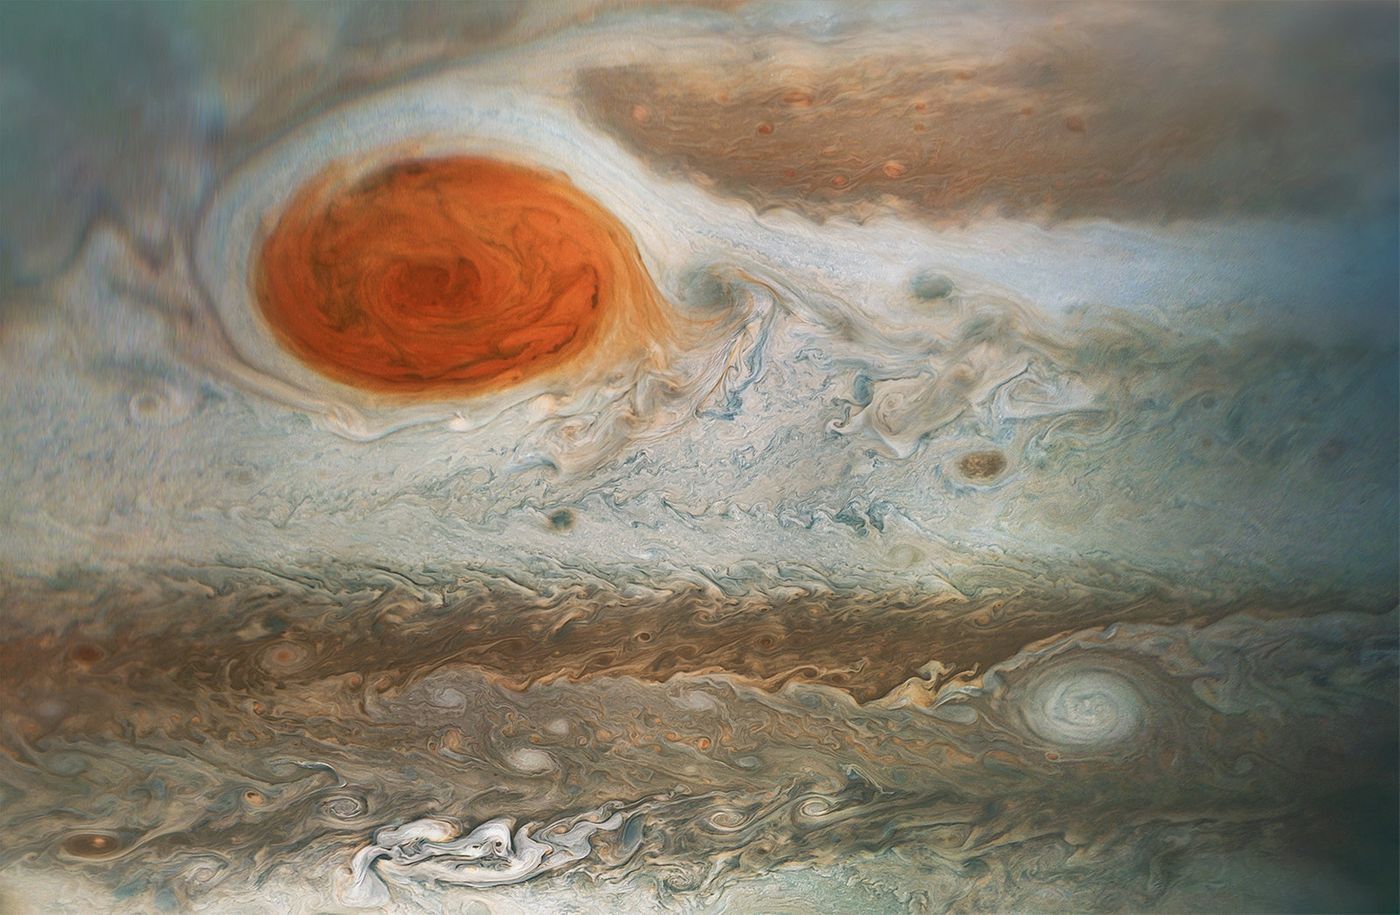 A color-enhanced combination of 3 images taken on April 1, 2018 as Juno performed its 12th close flyby of Jupiter. Juno was 15,379 miles (24,749 kilometers) to 30,633 miles (49,299 kilometers) from the tops of the clouds of the planet. / Credit: NASA/JPL-Caltech/SwRI/MSSS/ Gerald Eichstädt /Seán Doran